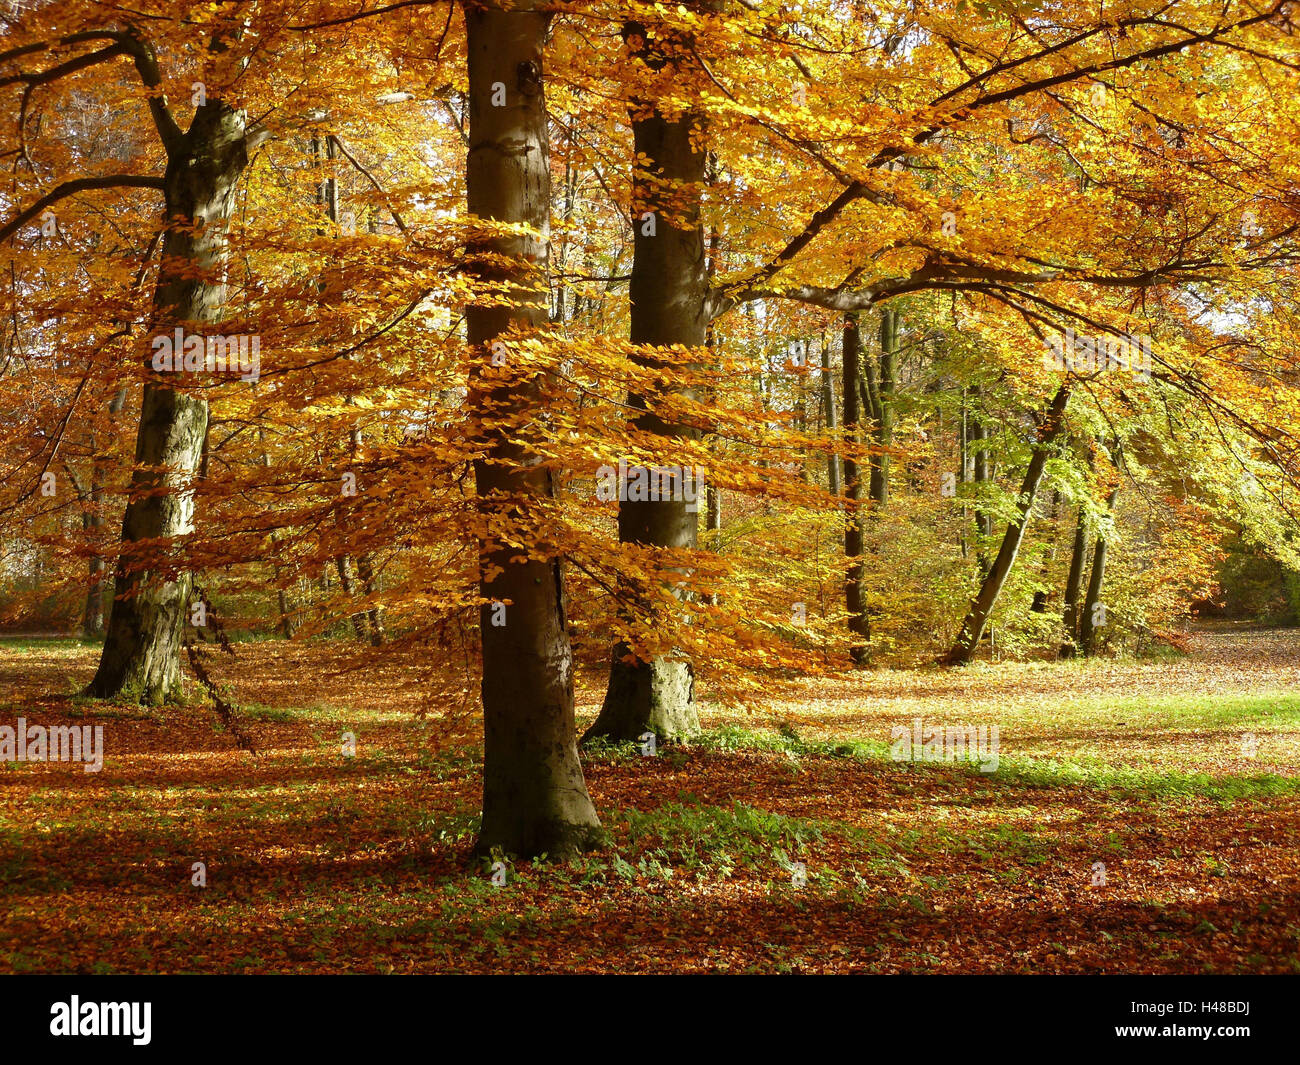 Autumn, colour the leaves, beech trees, park scenery, Stock Photo